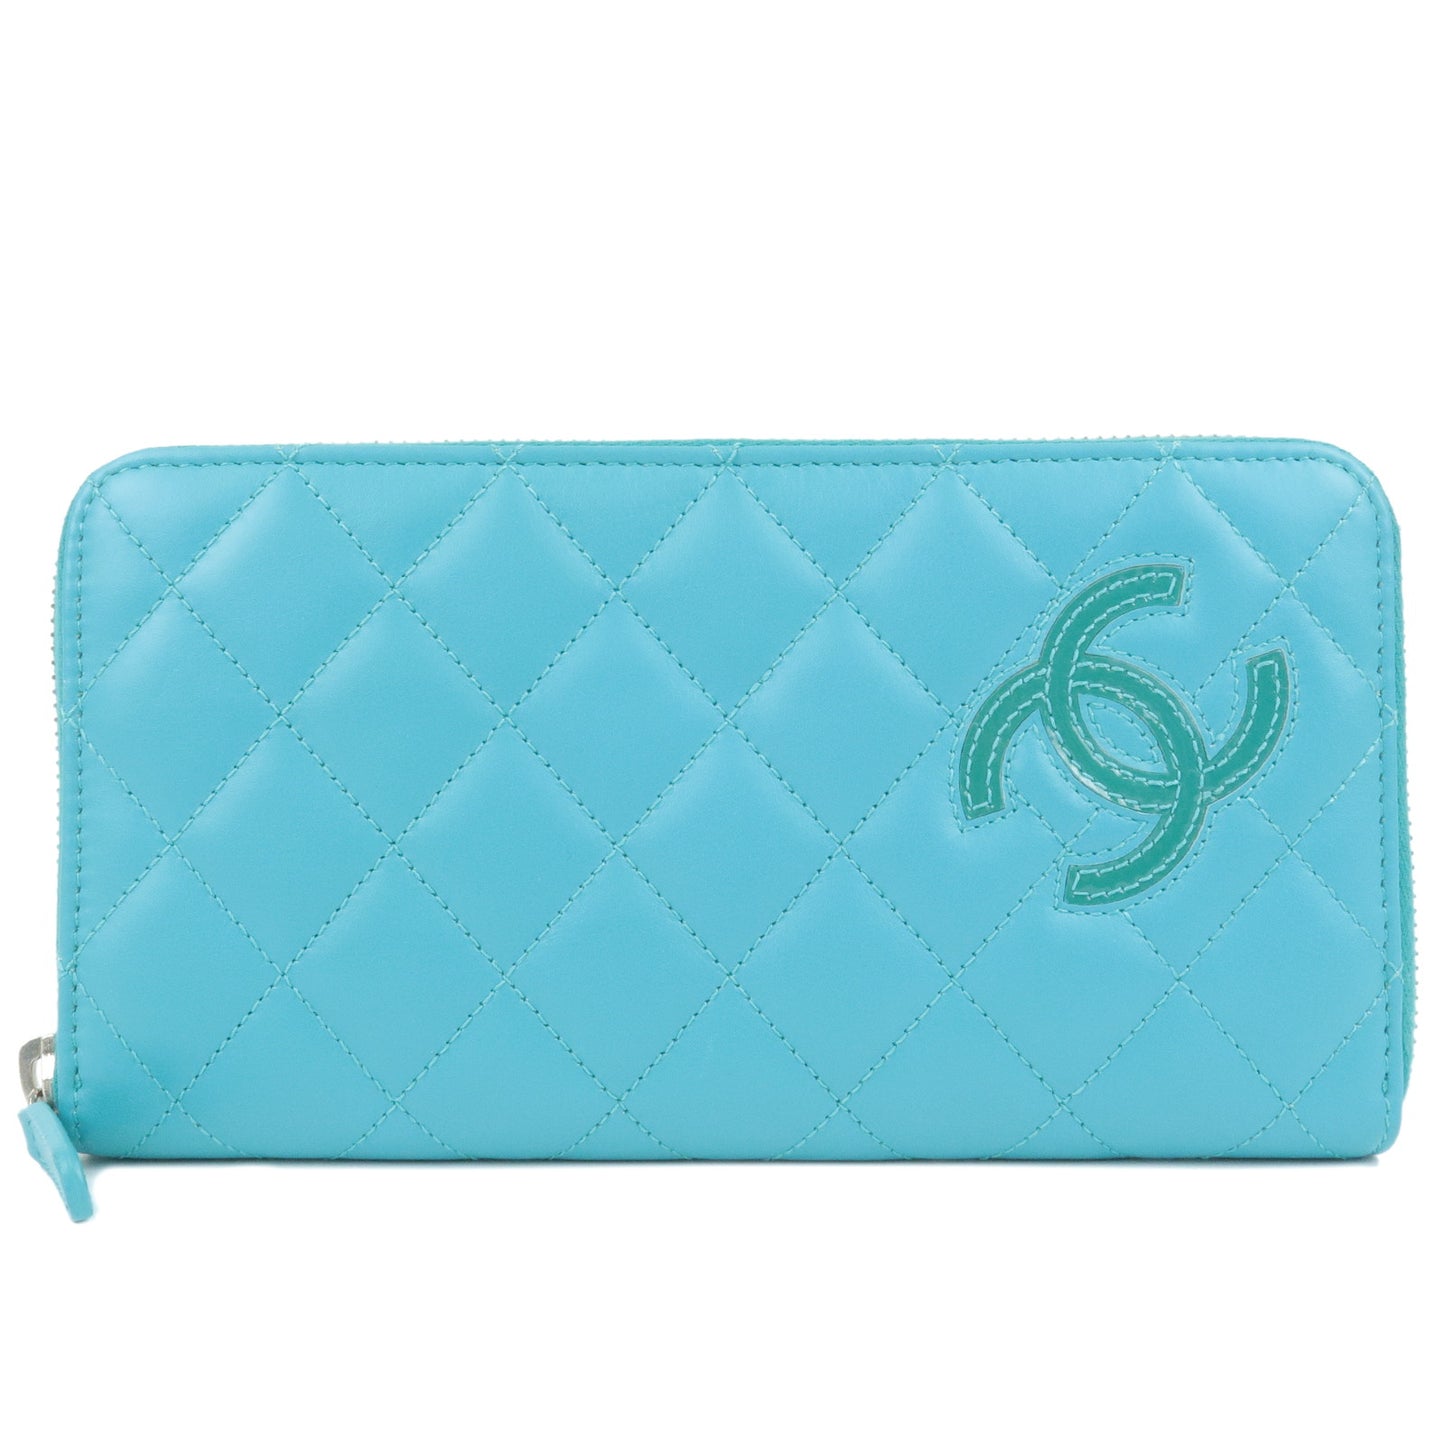 CHANEL-SimplyCC-Matelasse-Leather-Long-Wallet-Emerald-Green-A80213